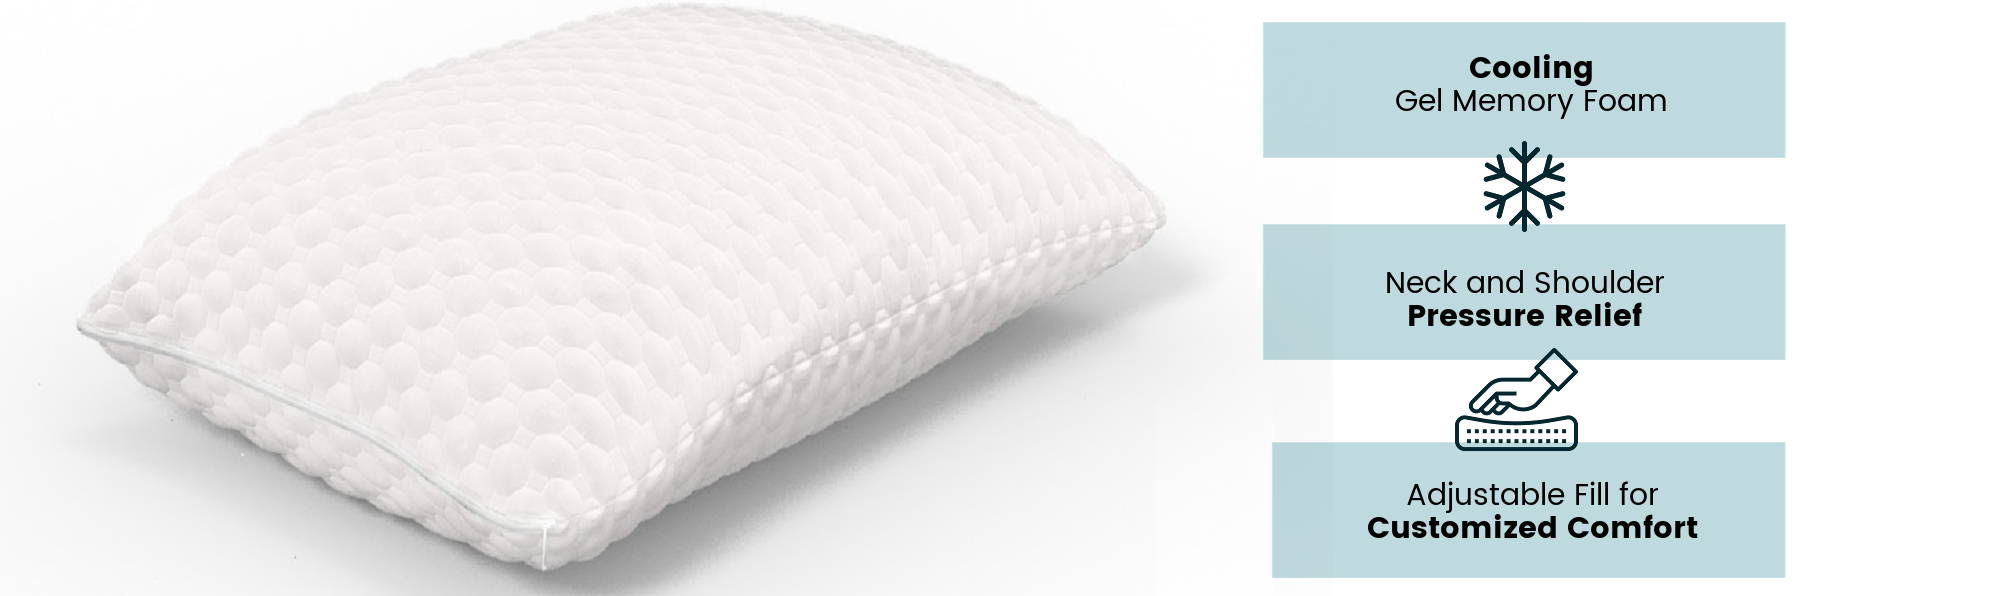 CBD and copper infused pillow on a white background that has cooling gel memory foam, gives neck and shoulder pressure relief, and is customizable with adjustable fill for comfort.